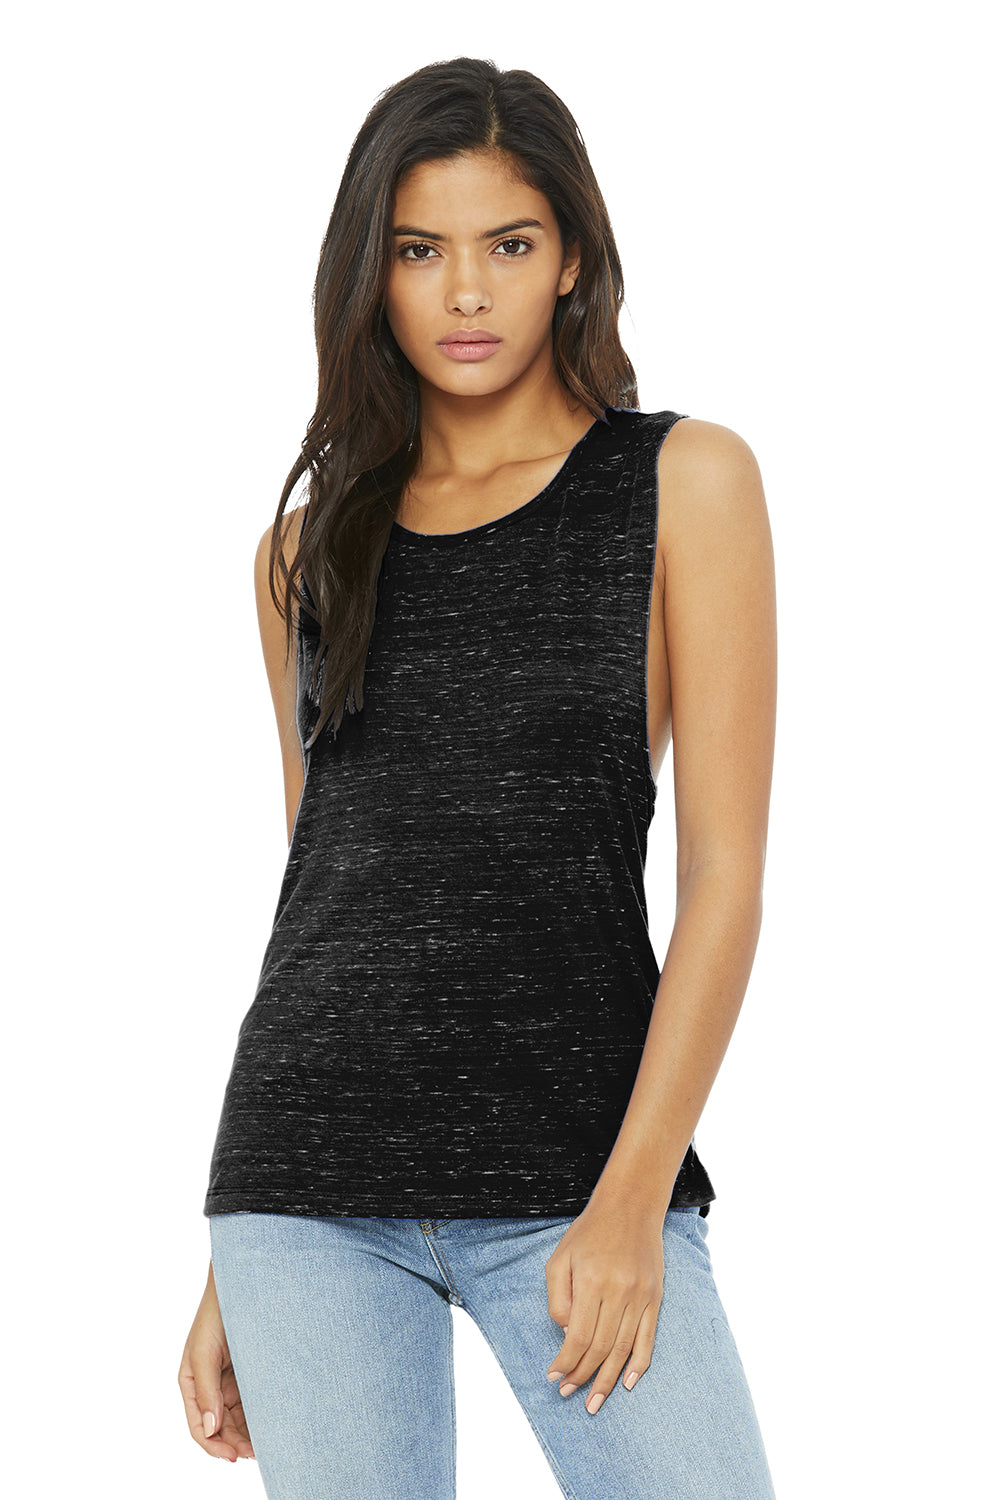 Bella + Canvas BC8803/B8803/8803 Womens Flowy Muscle Tank Top Black Marble Model Front